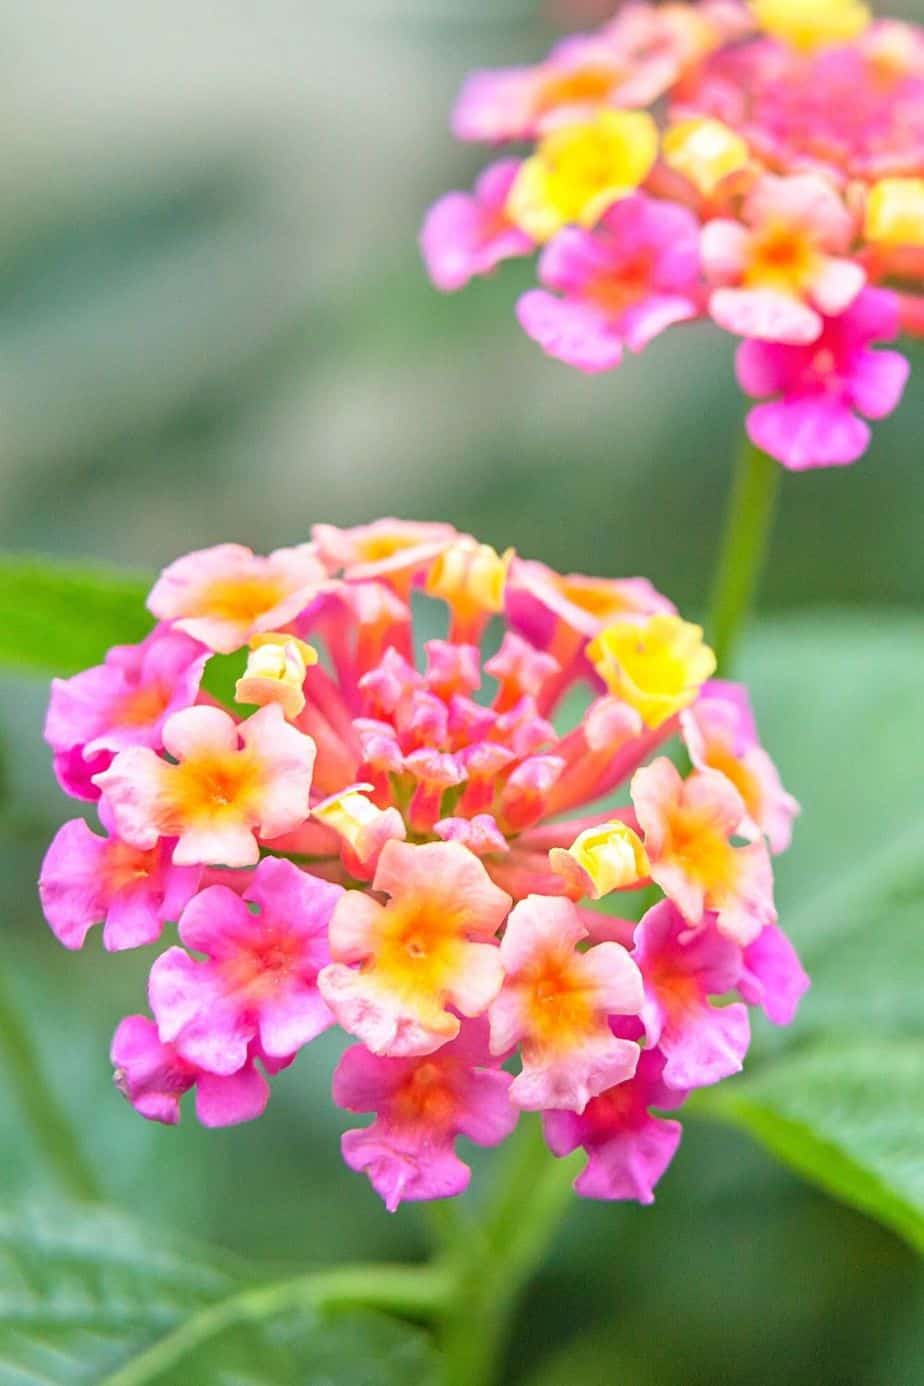 Keep Lantana away from cats as its toxic for them